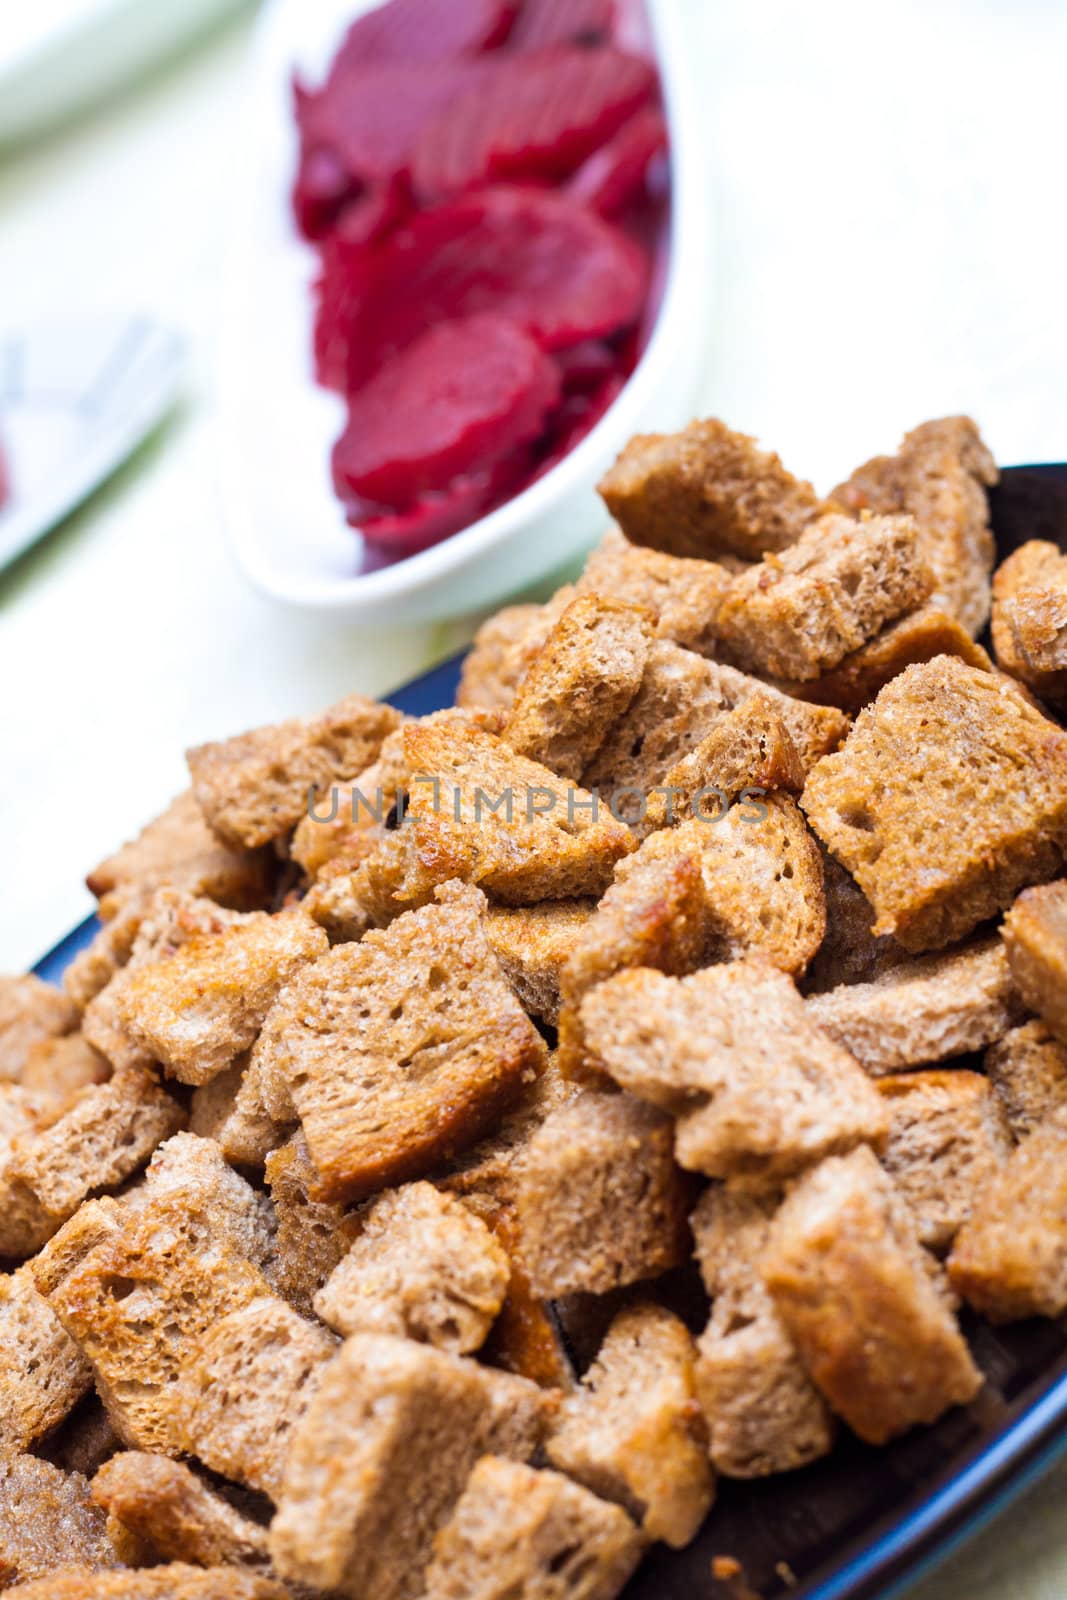 Closee up of croutons with beet in the backgroung by Lamarinx